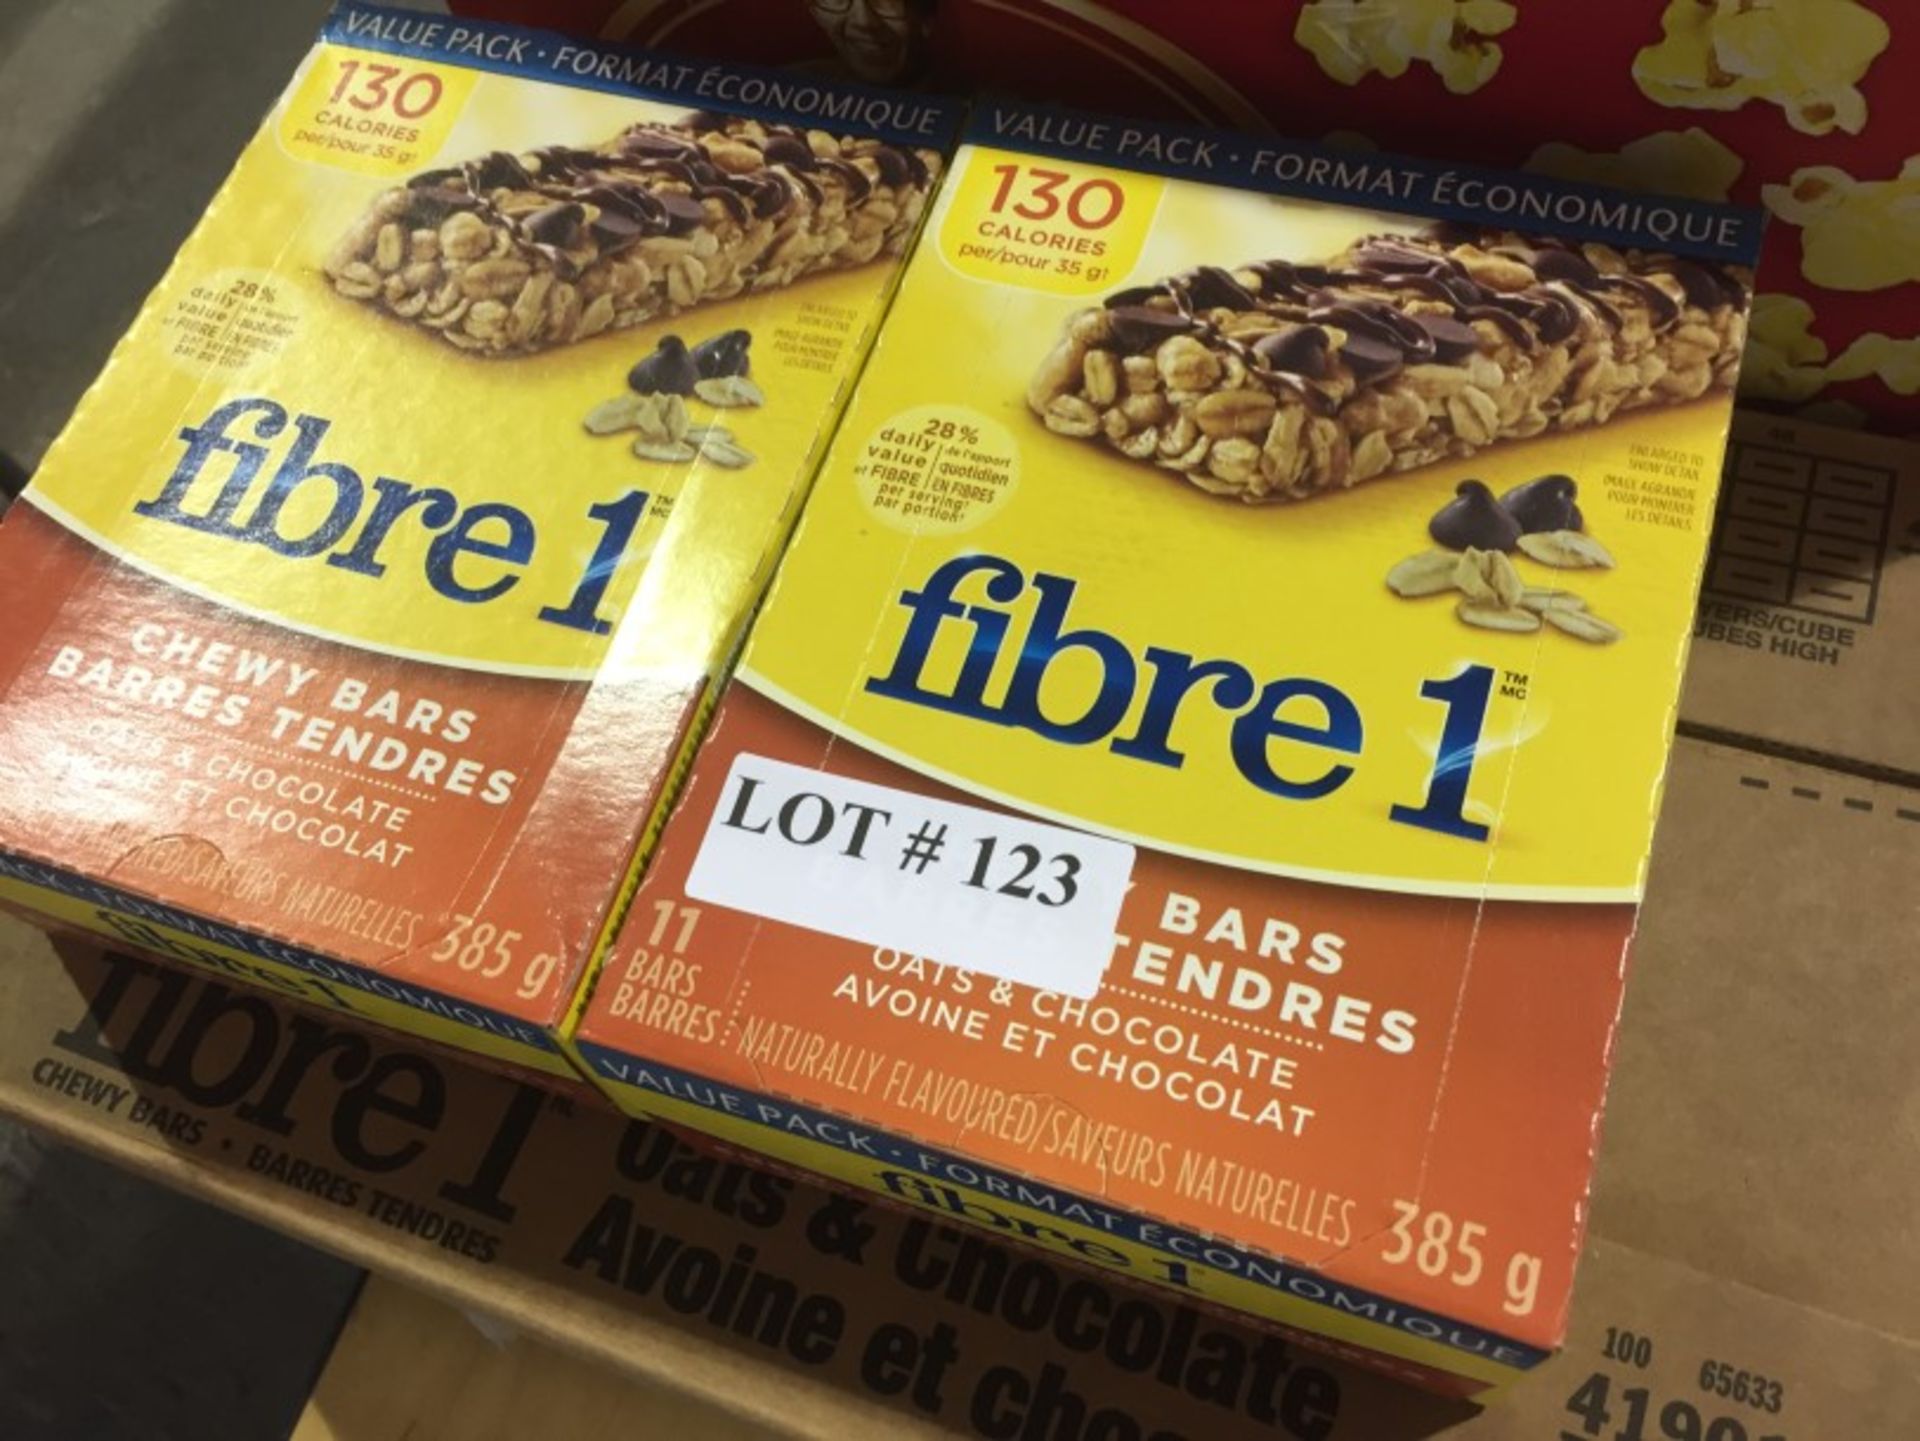 Fibre 1 Chewy Bars-Oats & Chocolate (Case)